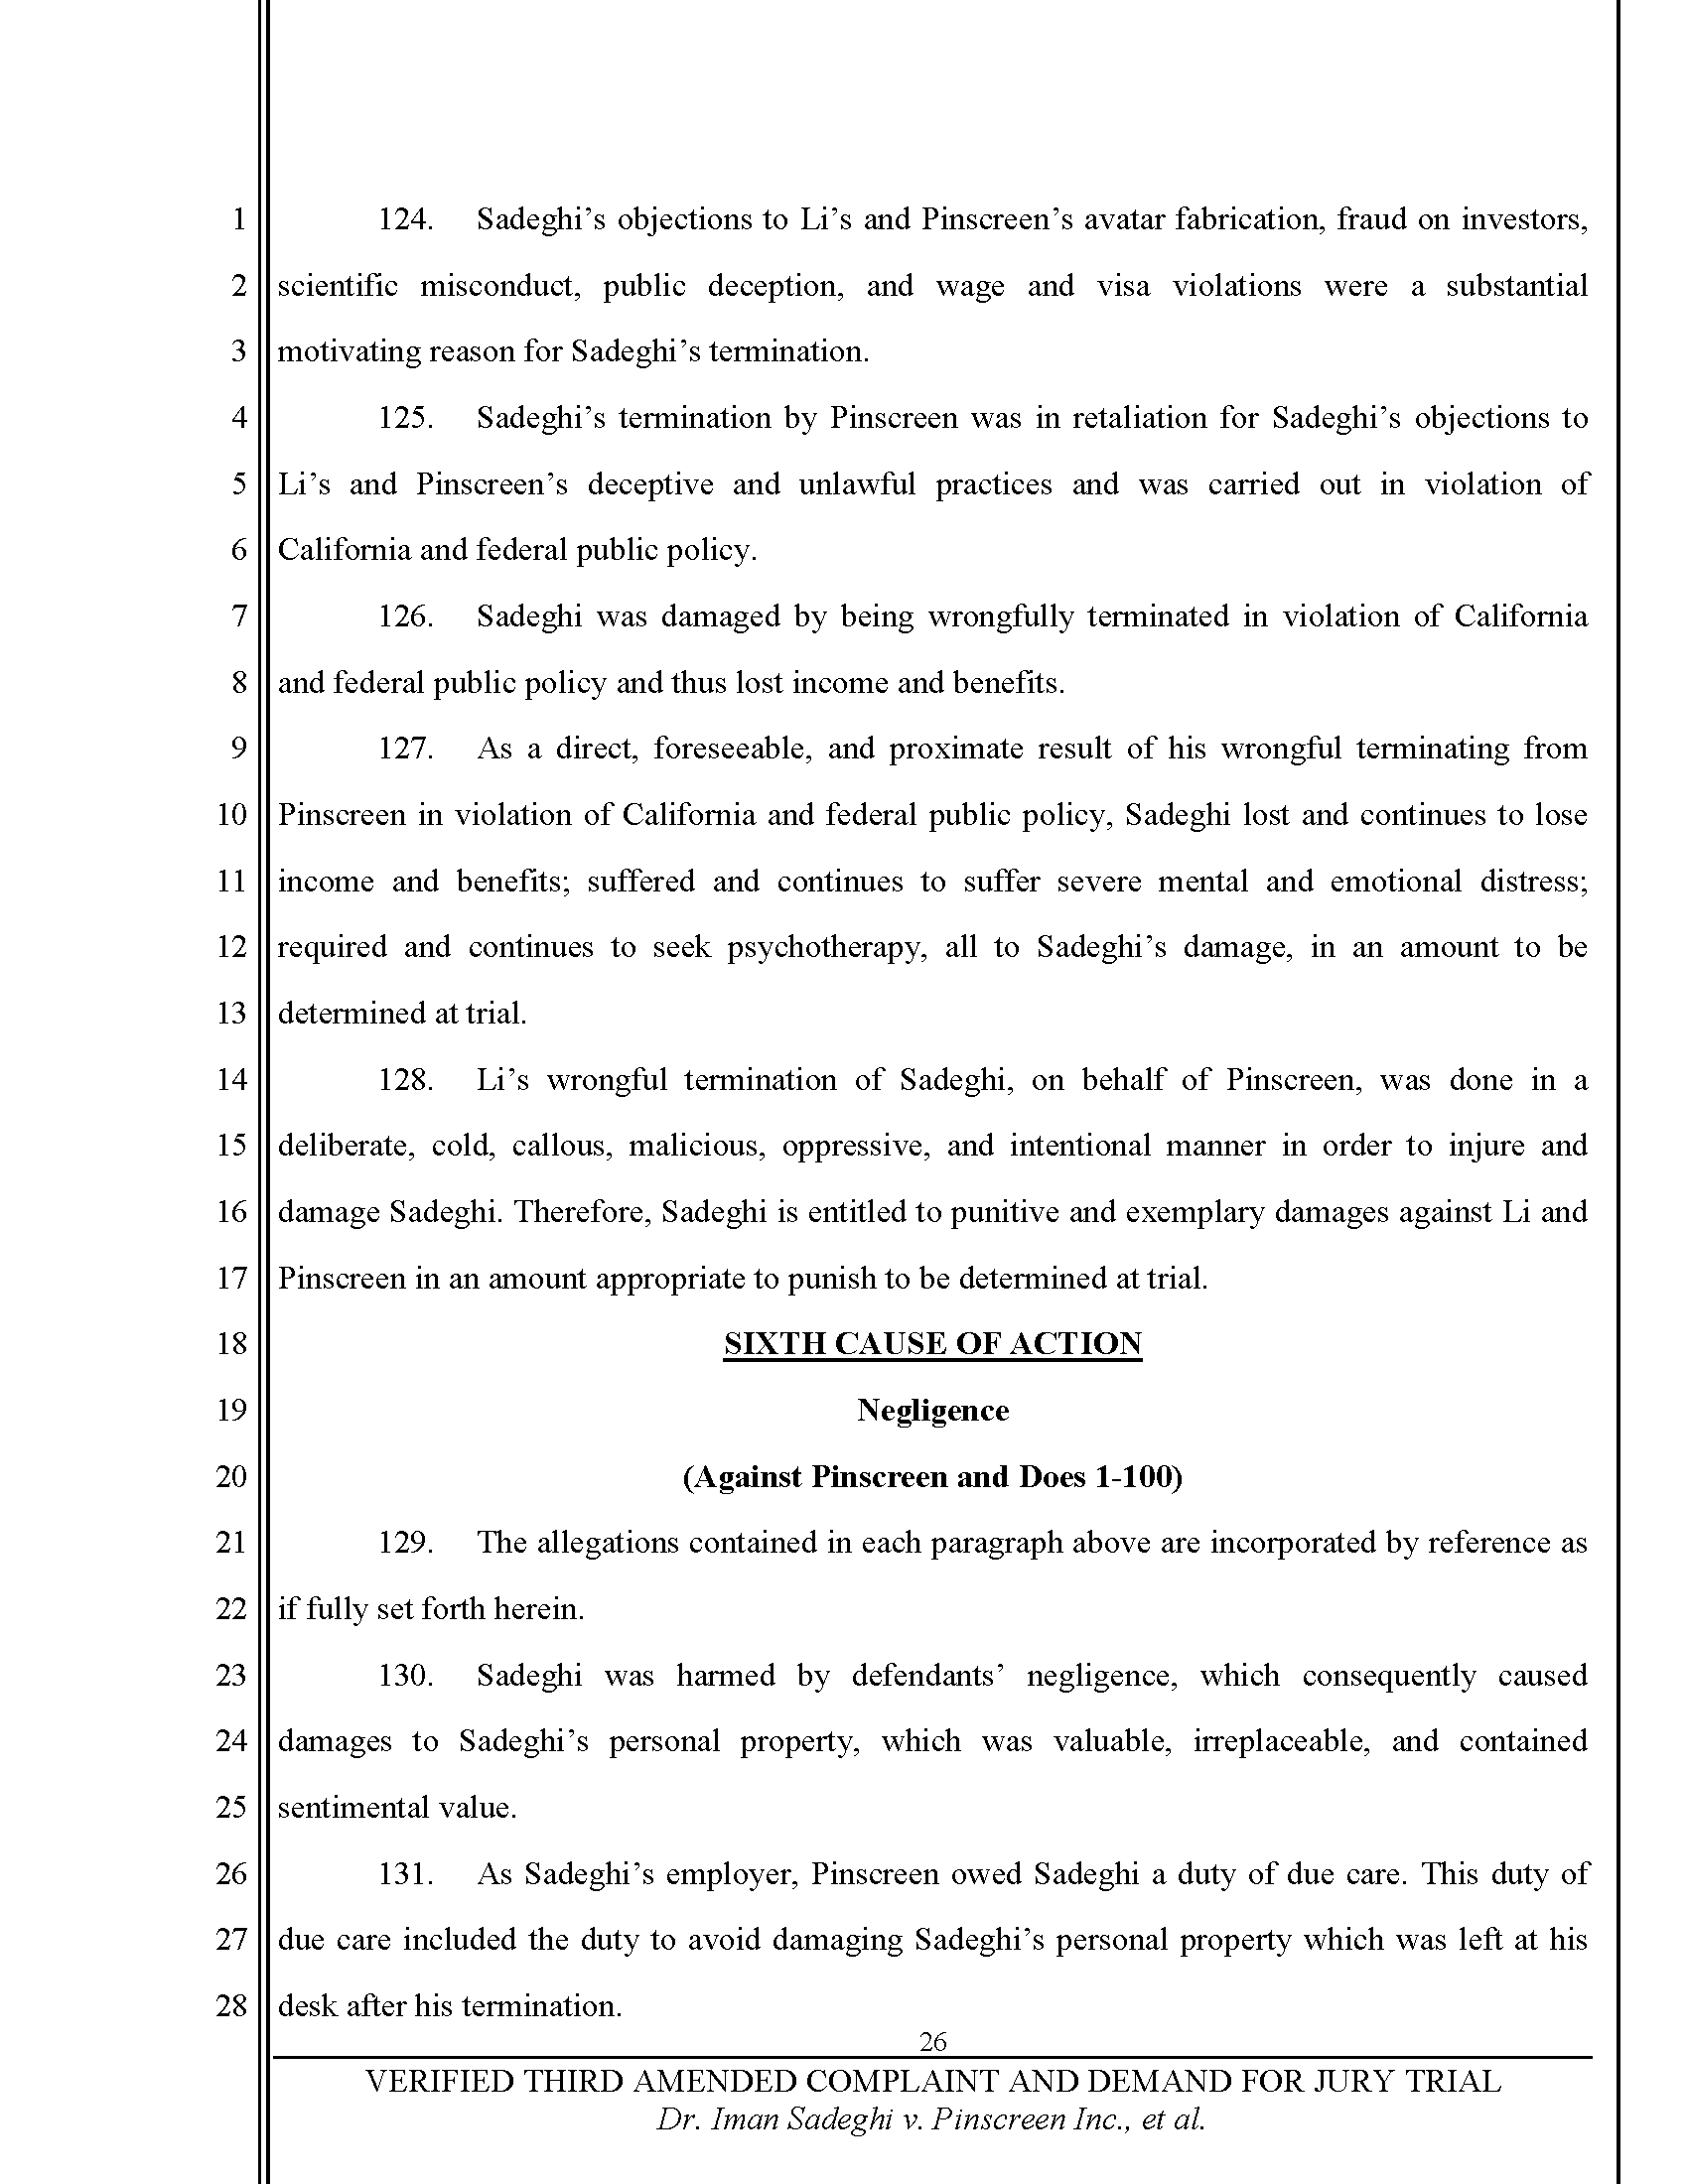 Third Amended Complaint (TAC) Page 27